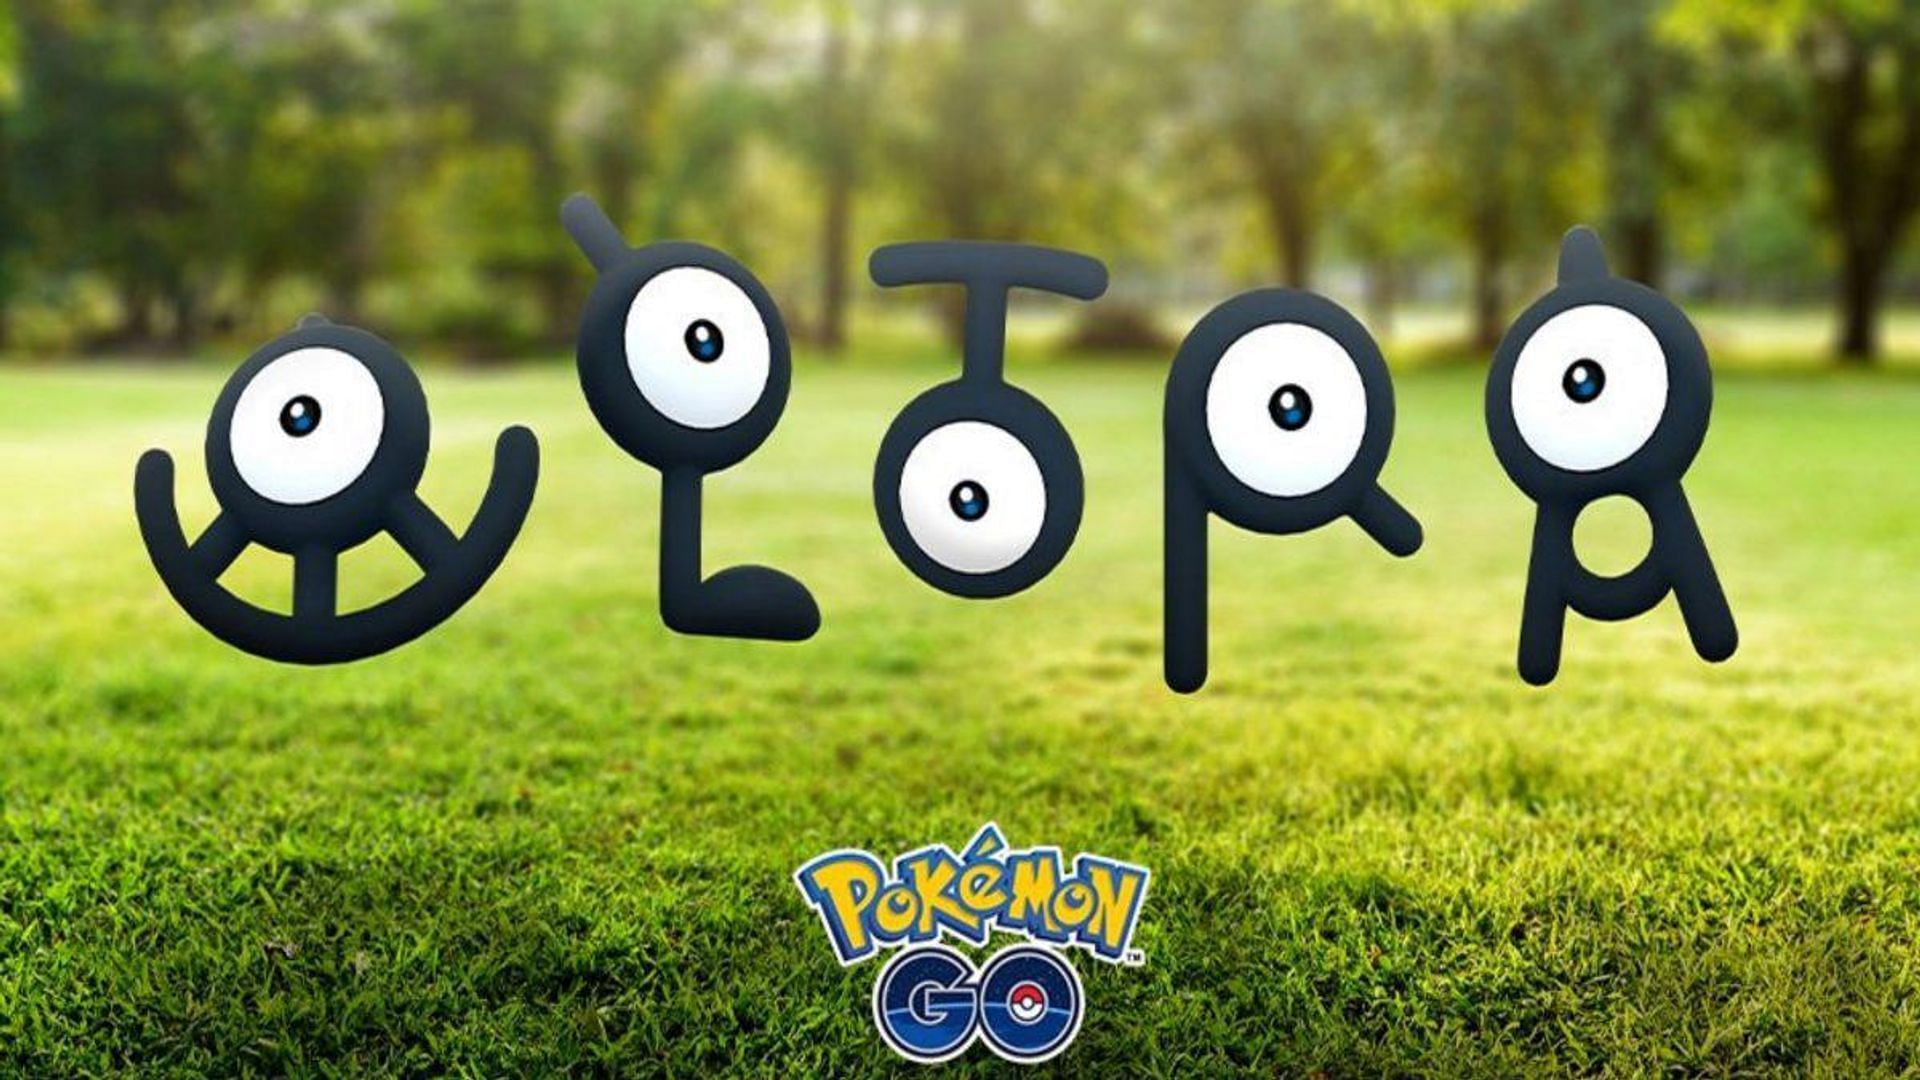 Official artwork for Pokemon GO featuring various Unown (Image via Niantic)